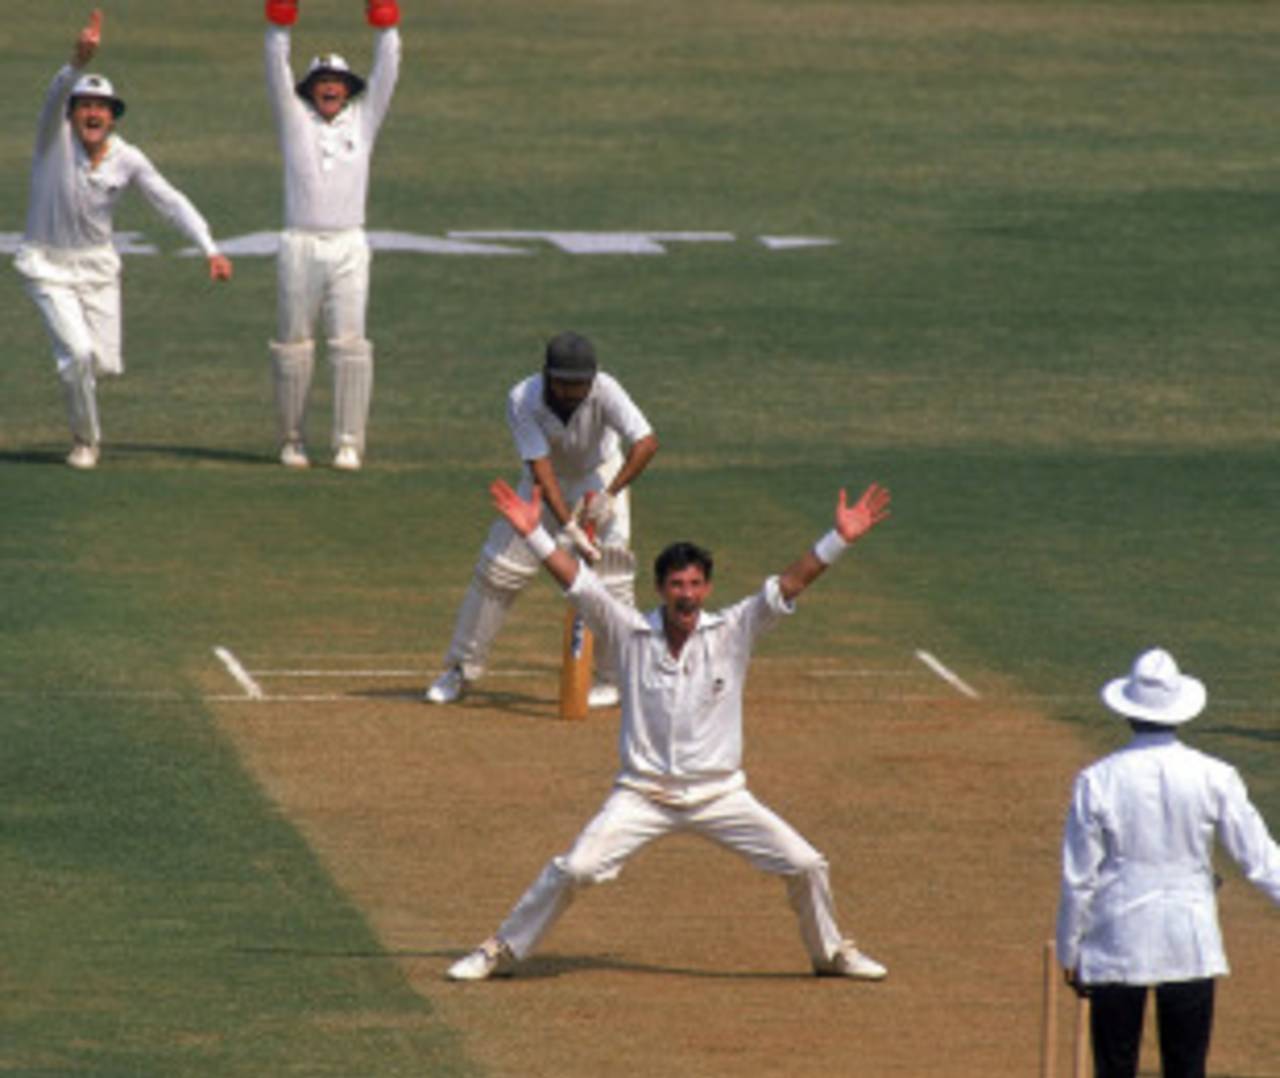 Richard Hadlee appeals for a wicket, India v New Zealand, 2nd Test, Bombay, 2nd day, November 25, 1988